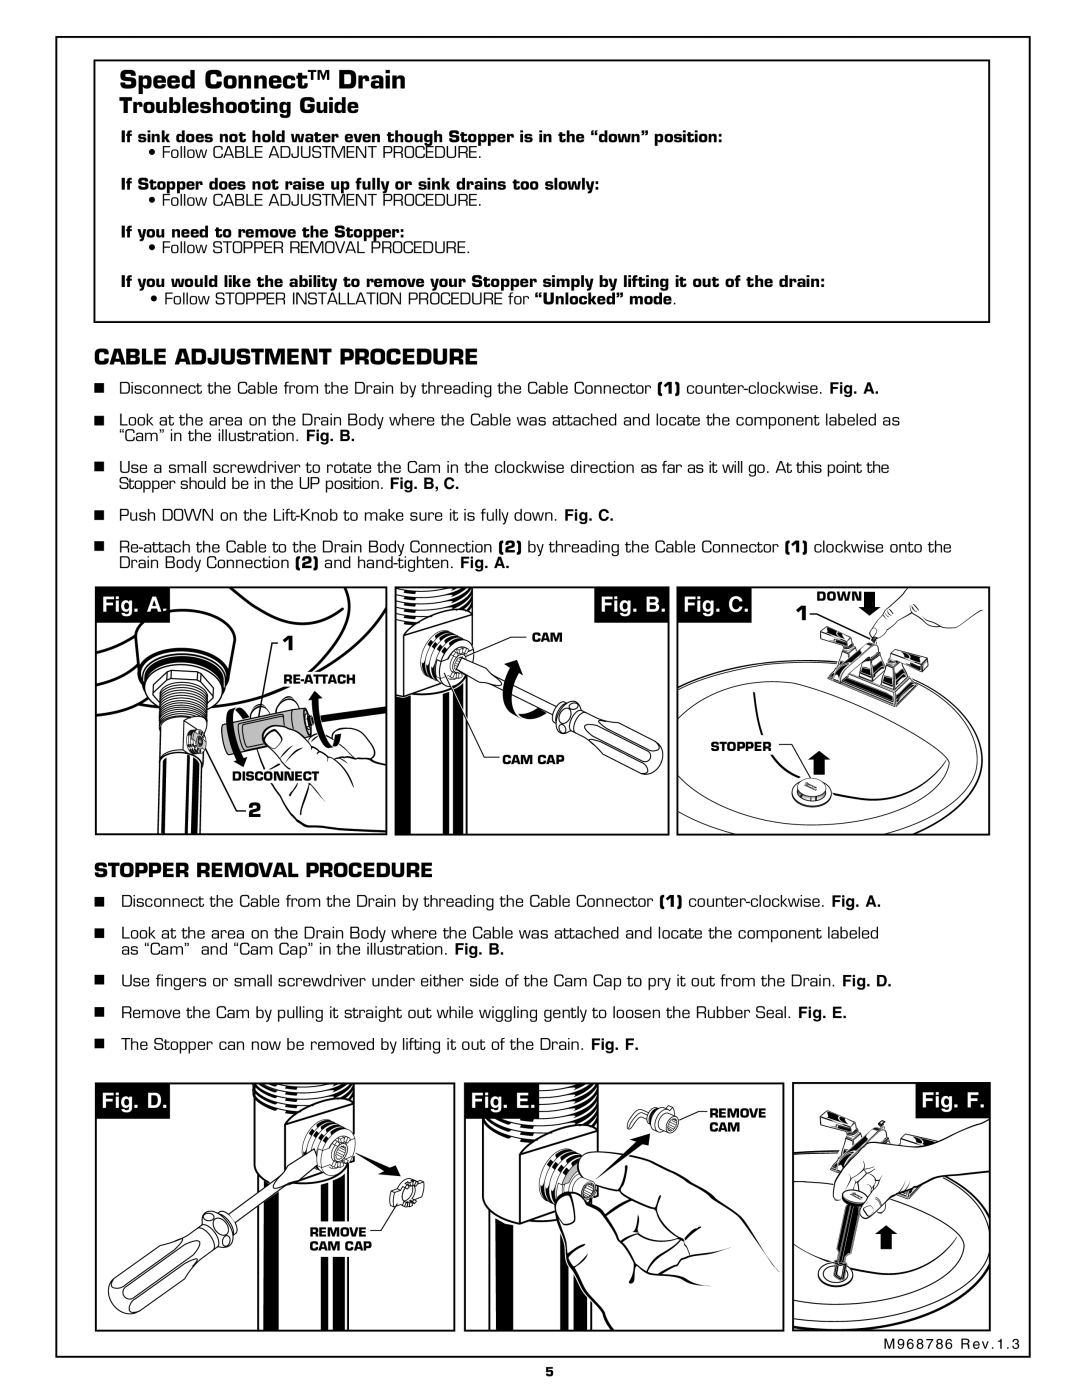 American Standard 2555.201 Troubleshooting Guide, Cable Adjustment Procedure, Fig. A, Fig. B, Fig. C, Fig. D, Fig. E 